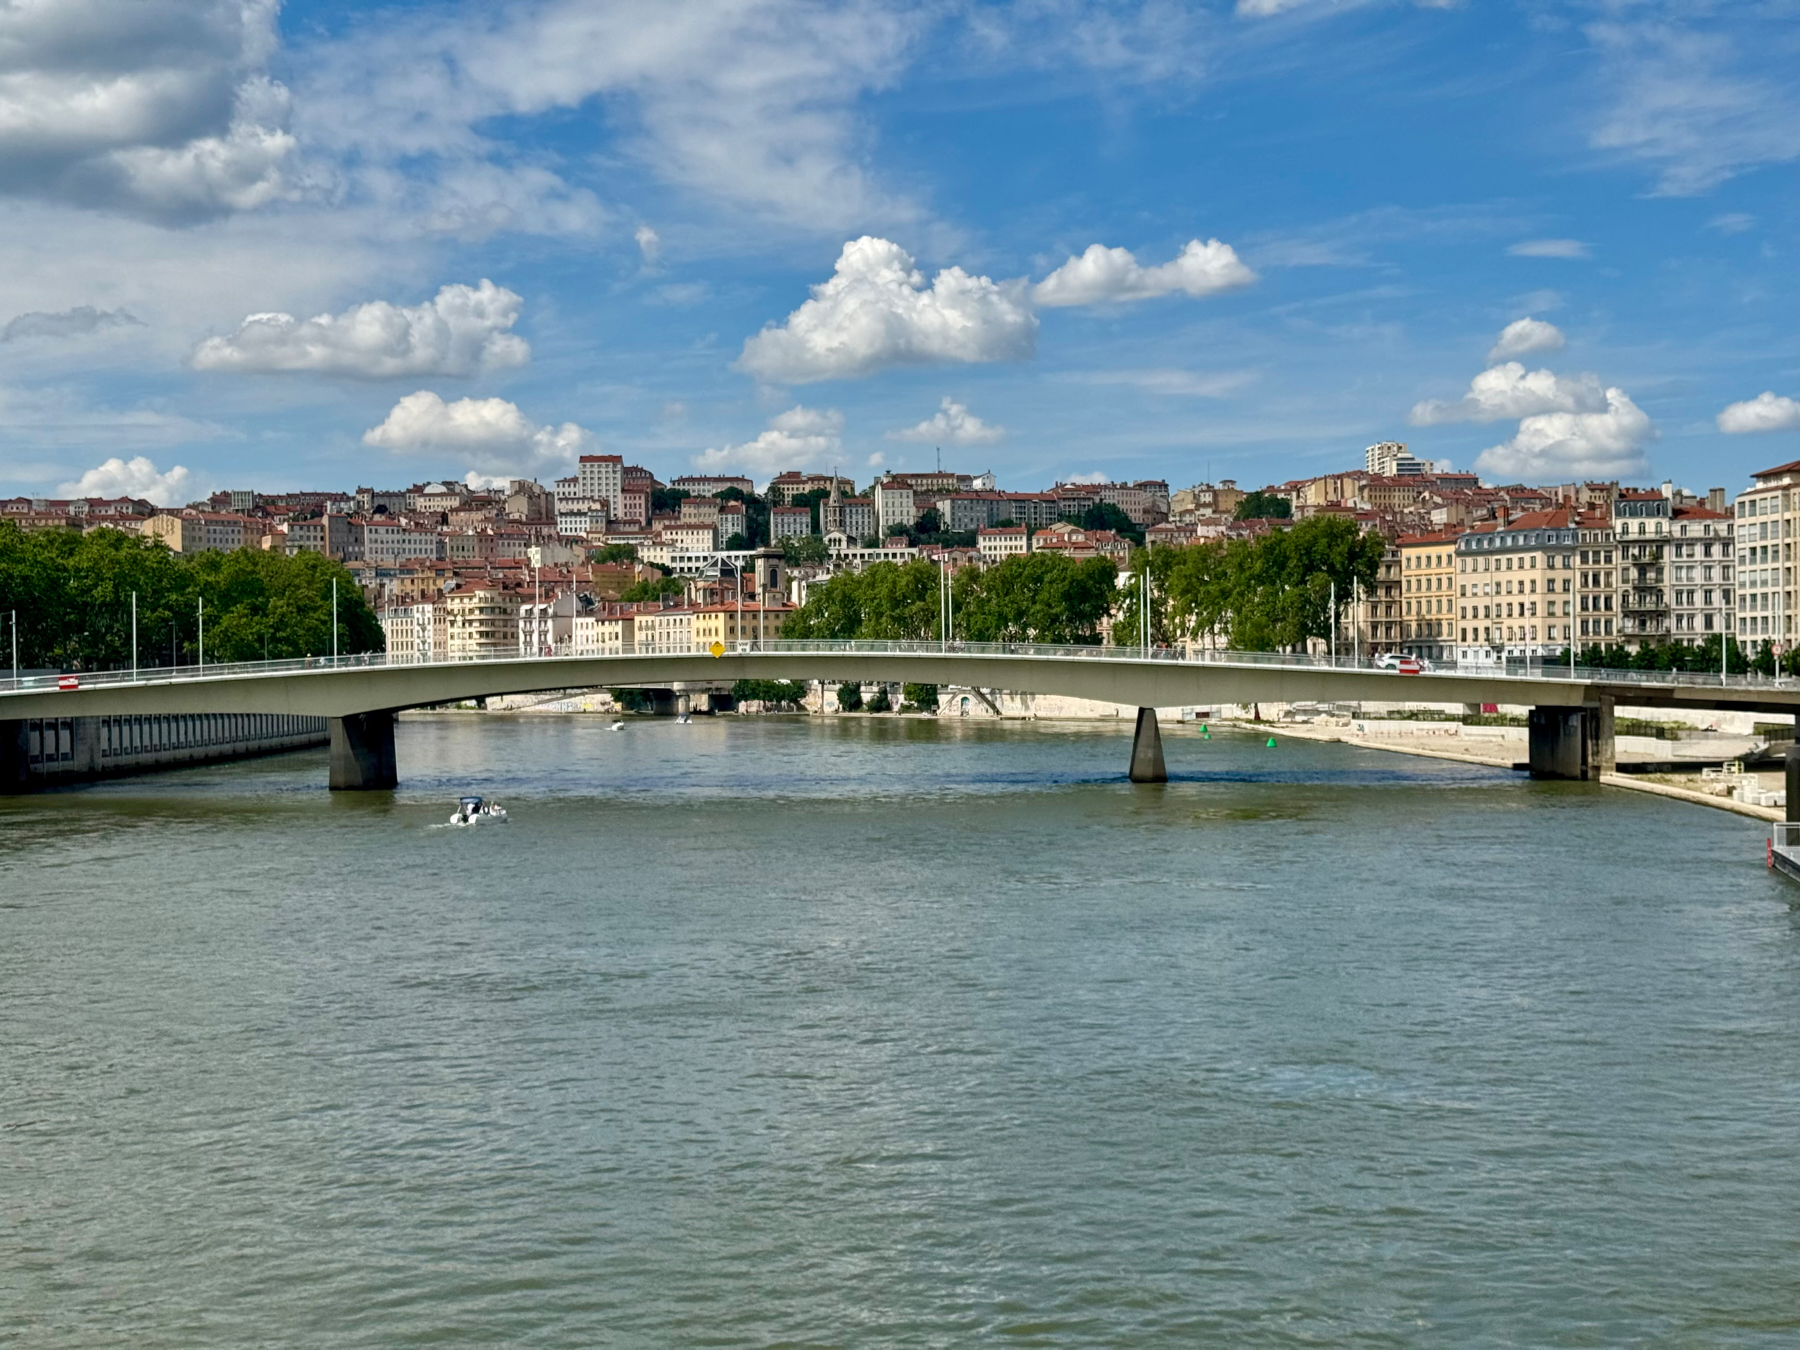 Lyon, France, showing the Sôane river with a motorboat passing under a concrete bridge. The bridge has streetlights and connects urban areas with historic buildings and dense greenery on the riverbanks. The sky is partly cloudy with blue patches.